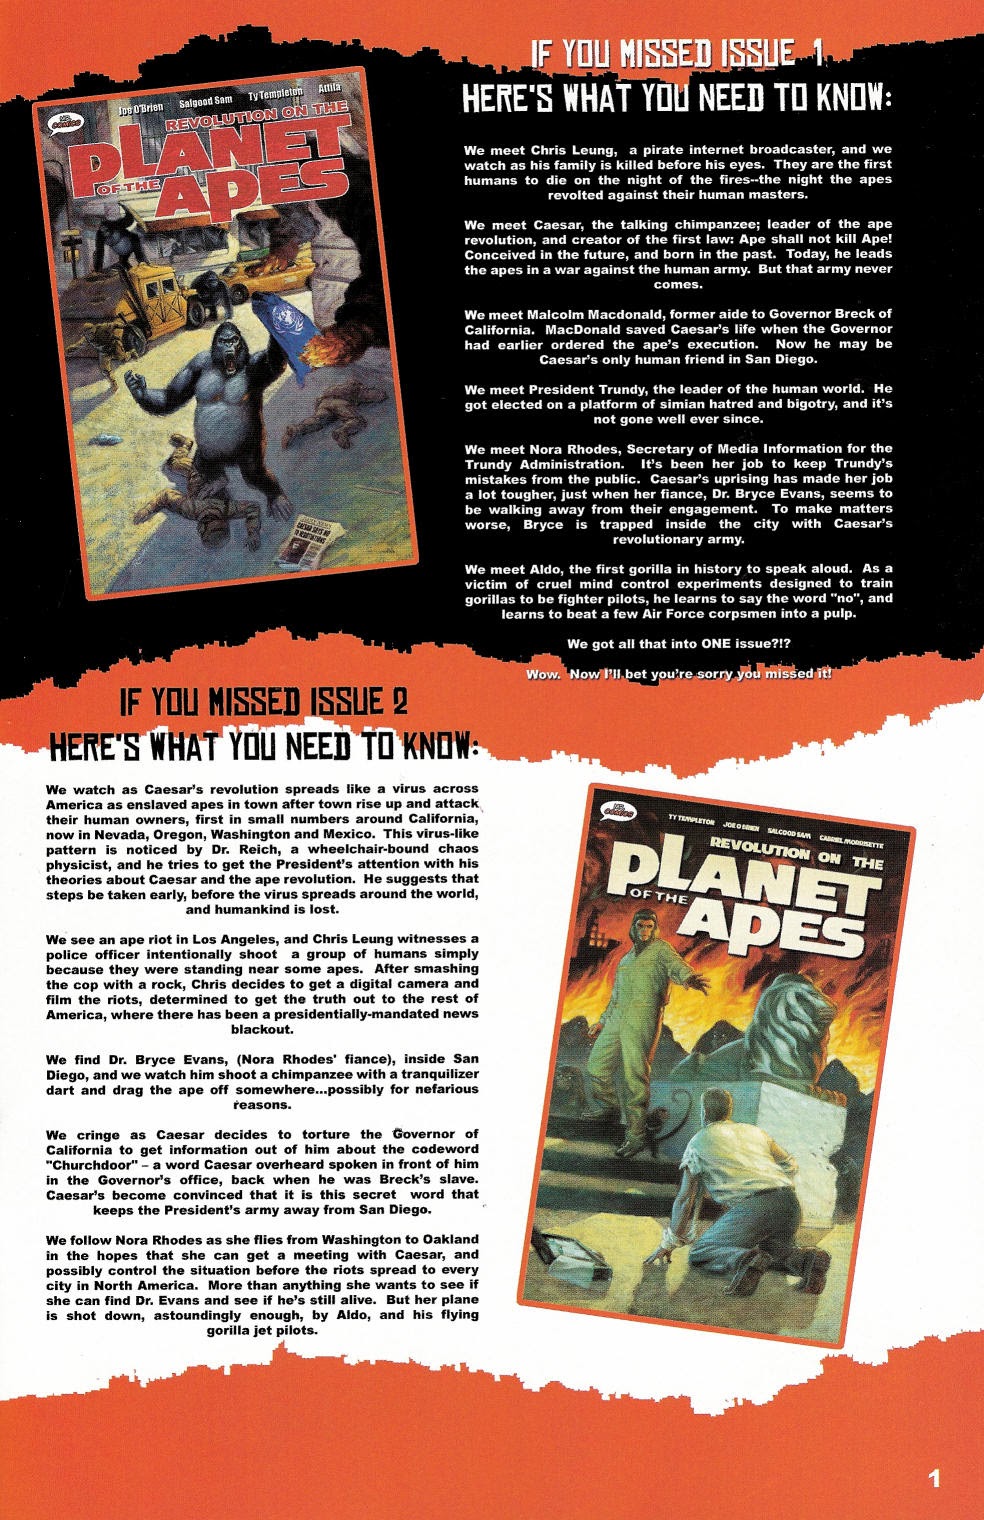 Read online Revolution on the Planet of the Apes comic -  Issue #5 - 3